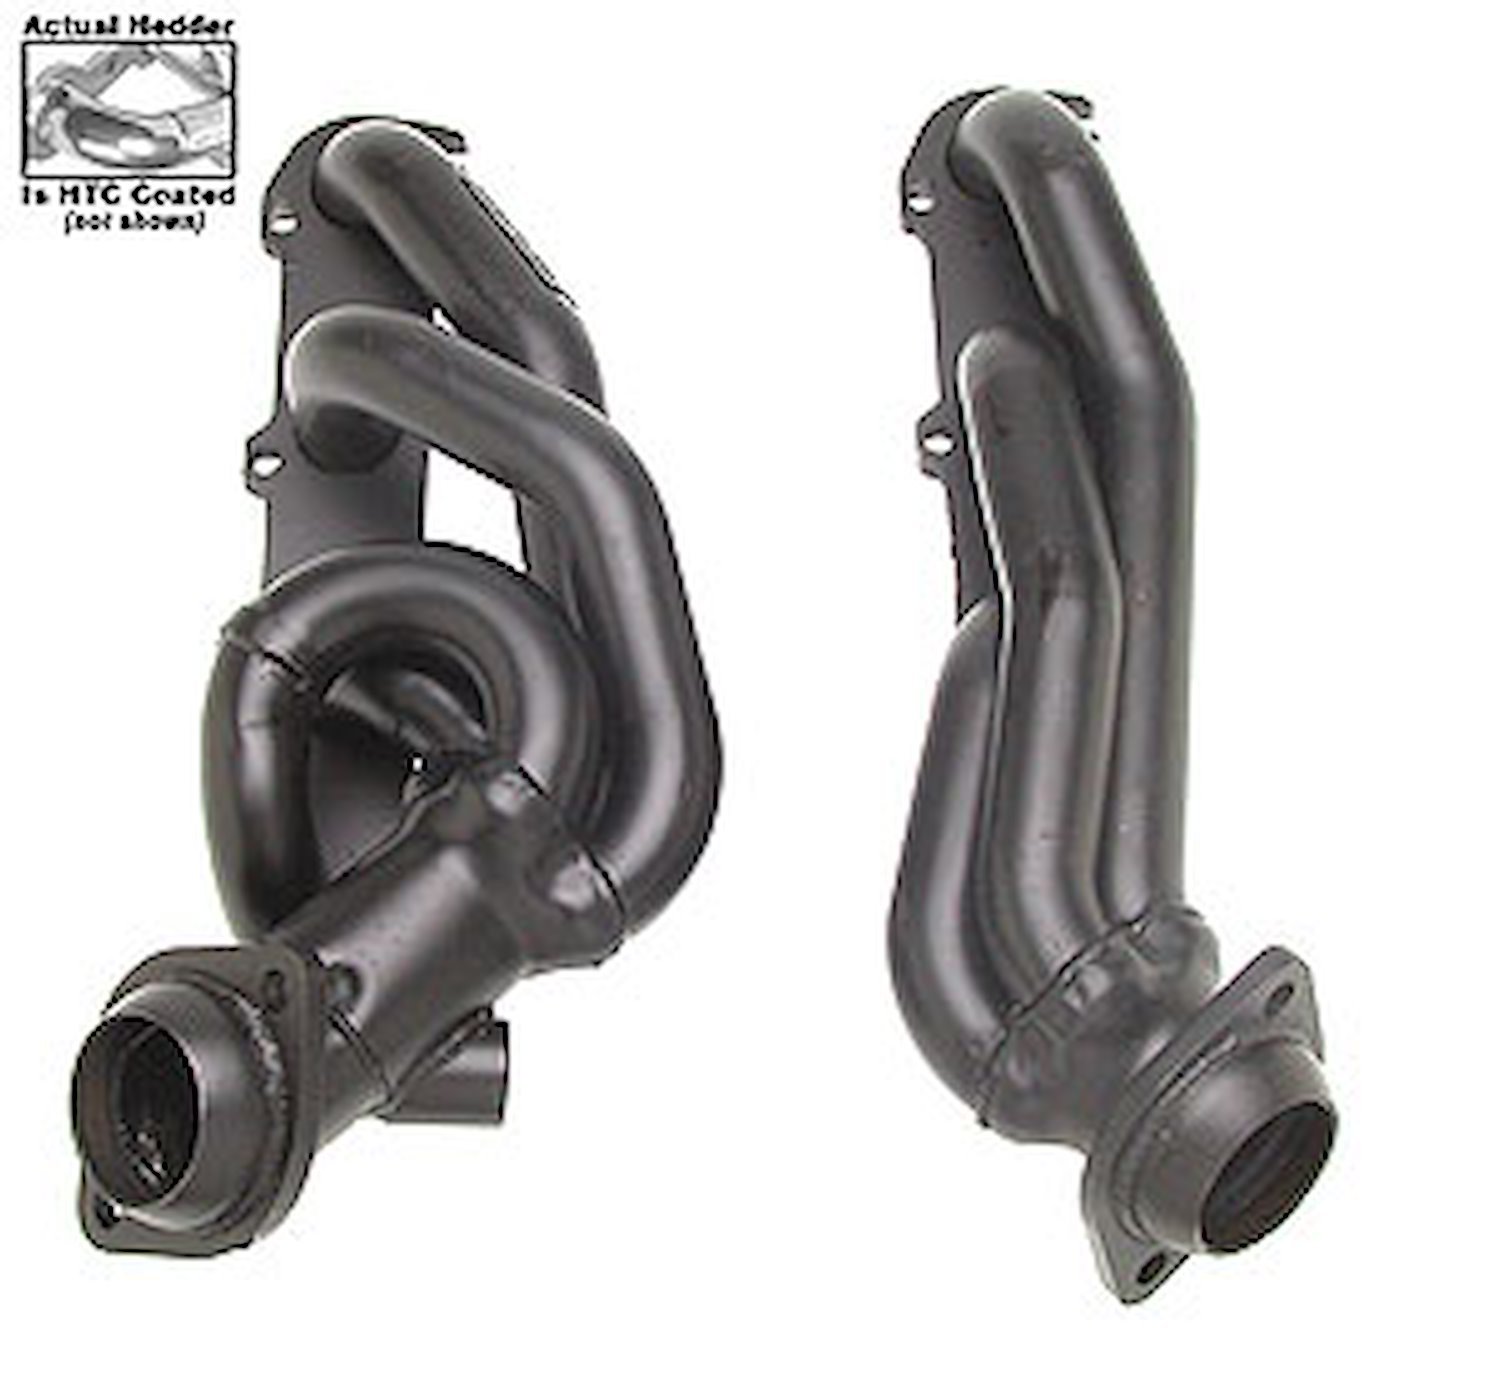 Standard Duty HTC Coated Shorty Headers 1997-02 Ford